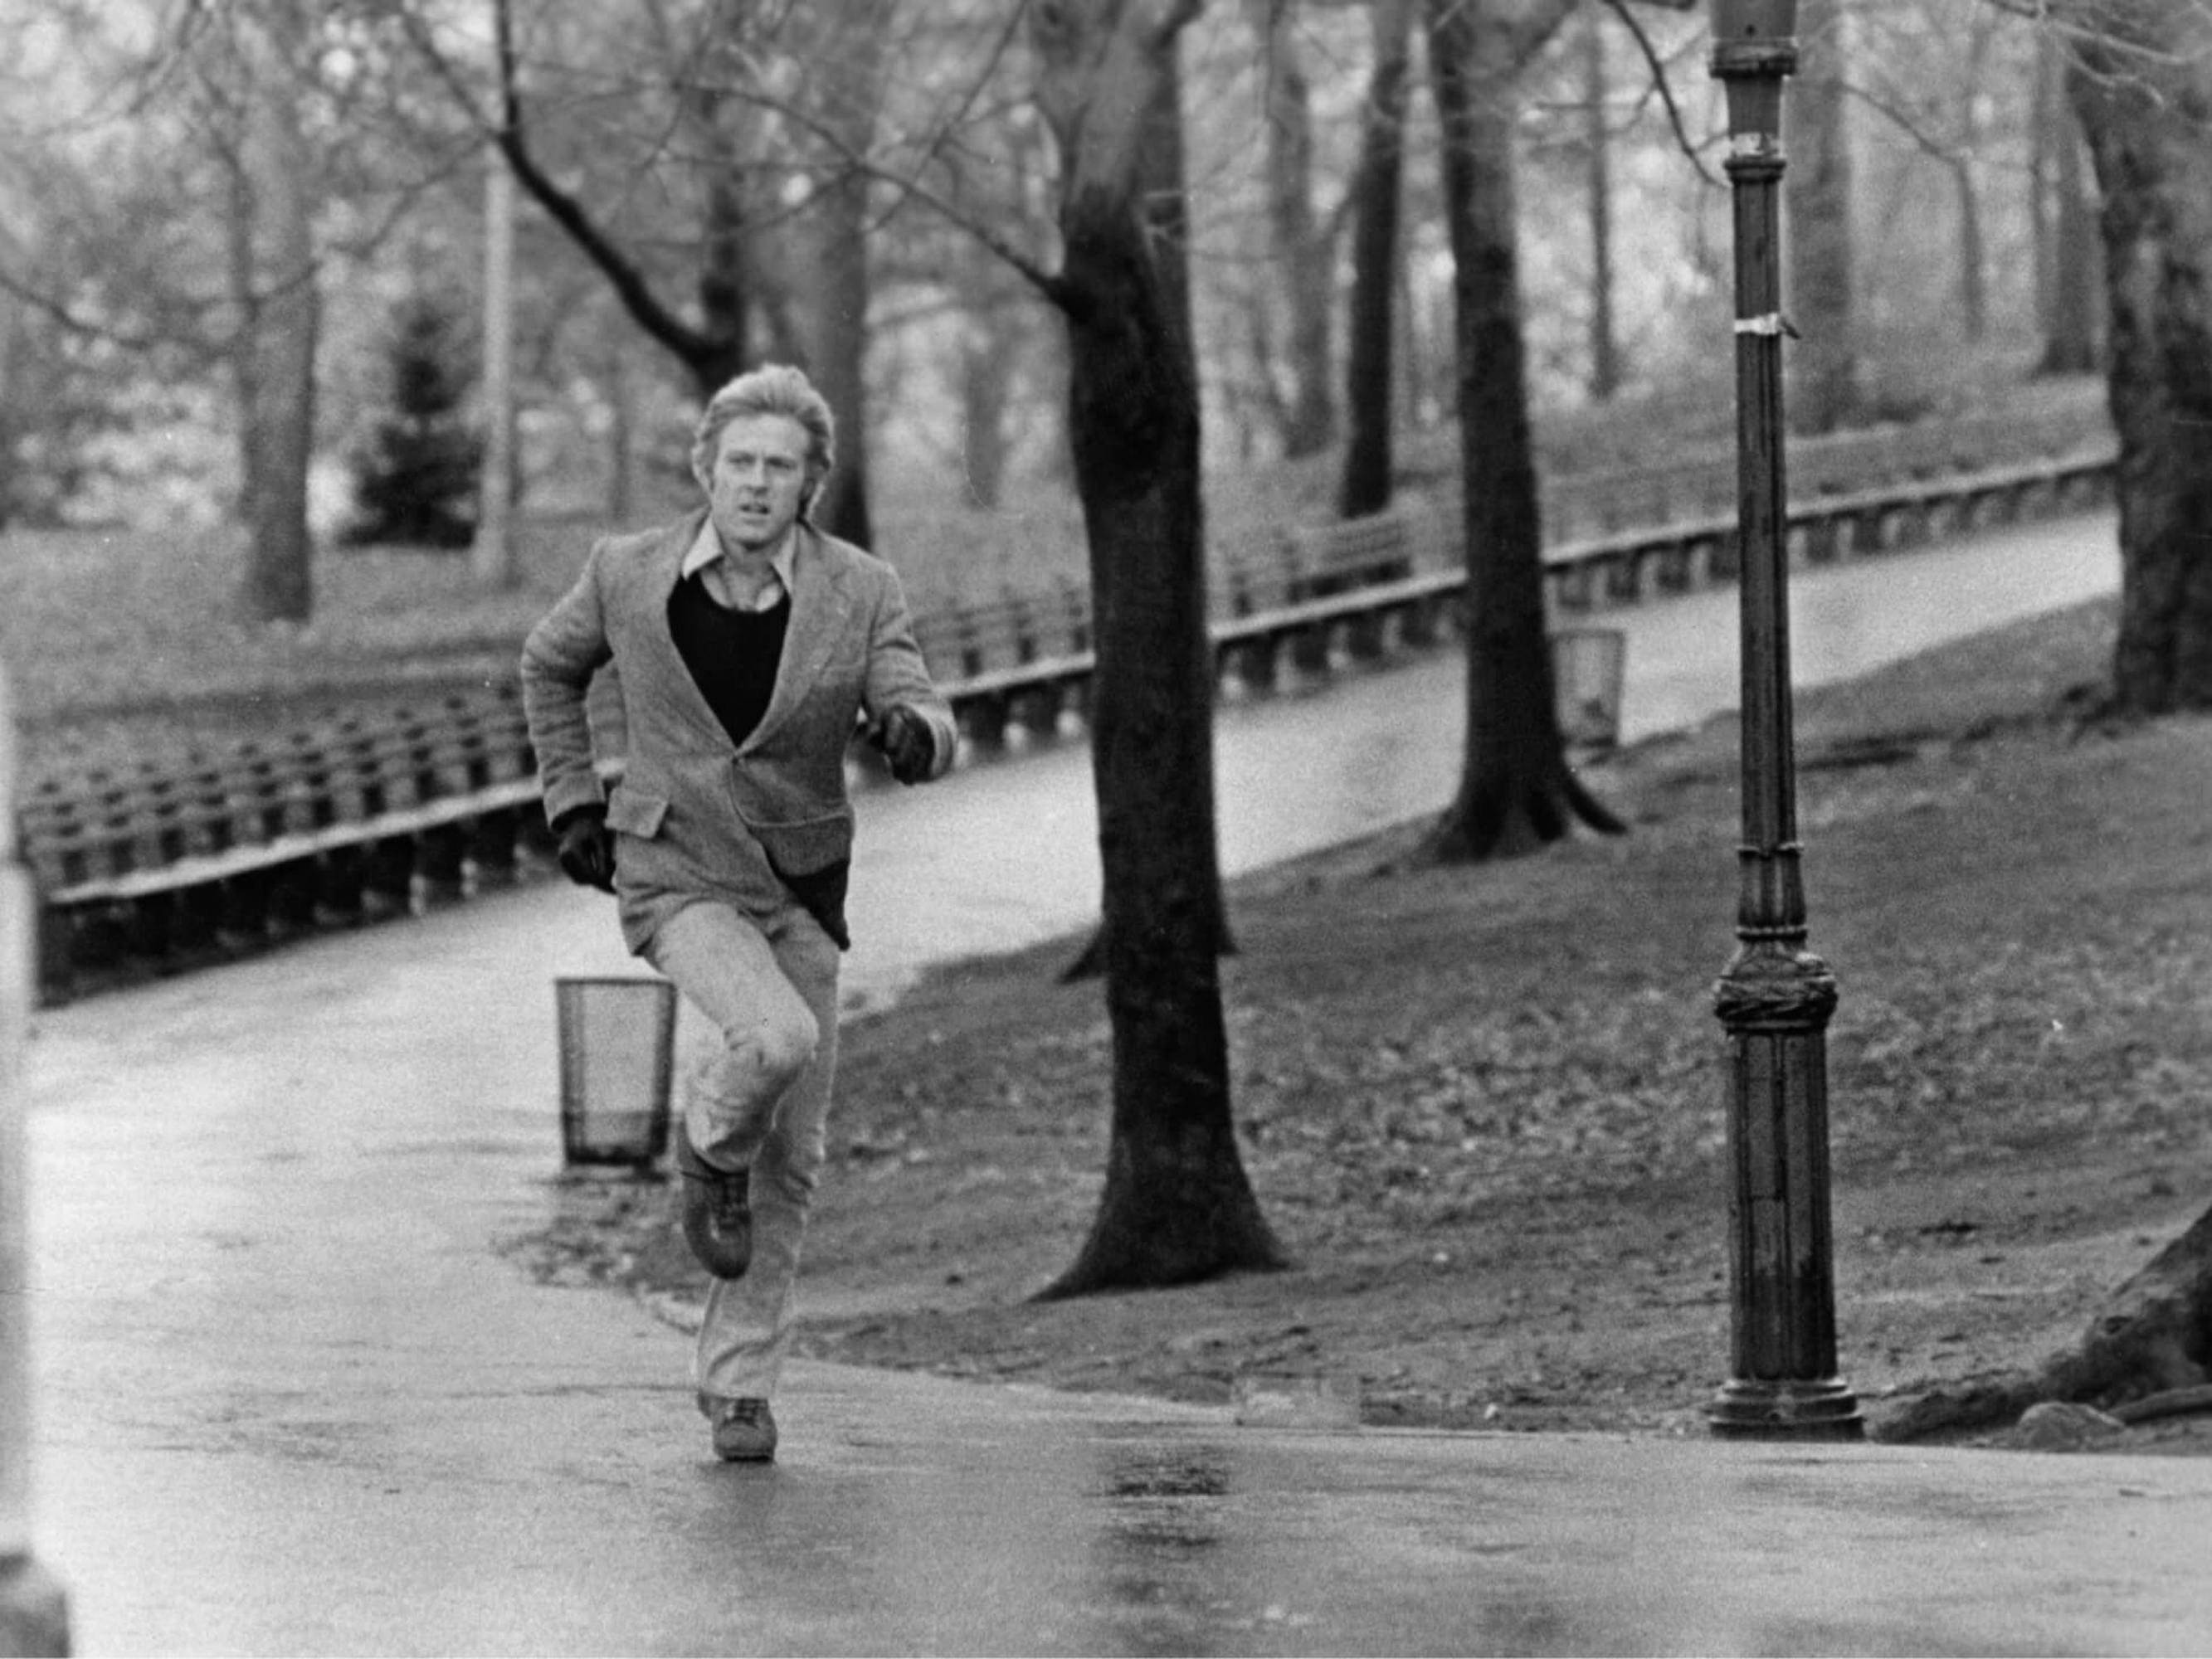 Joseph Turner (Robert Redford) in Three Days of the Condor runs through Central Park. His flare jeans aren’t slowing his pace!